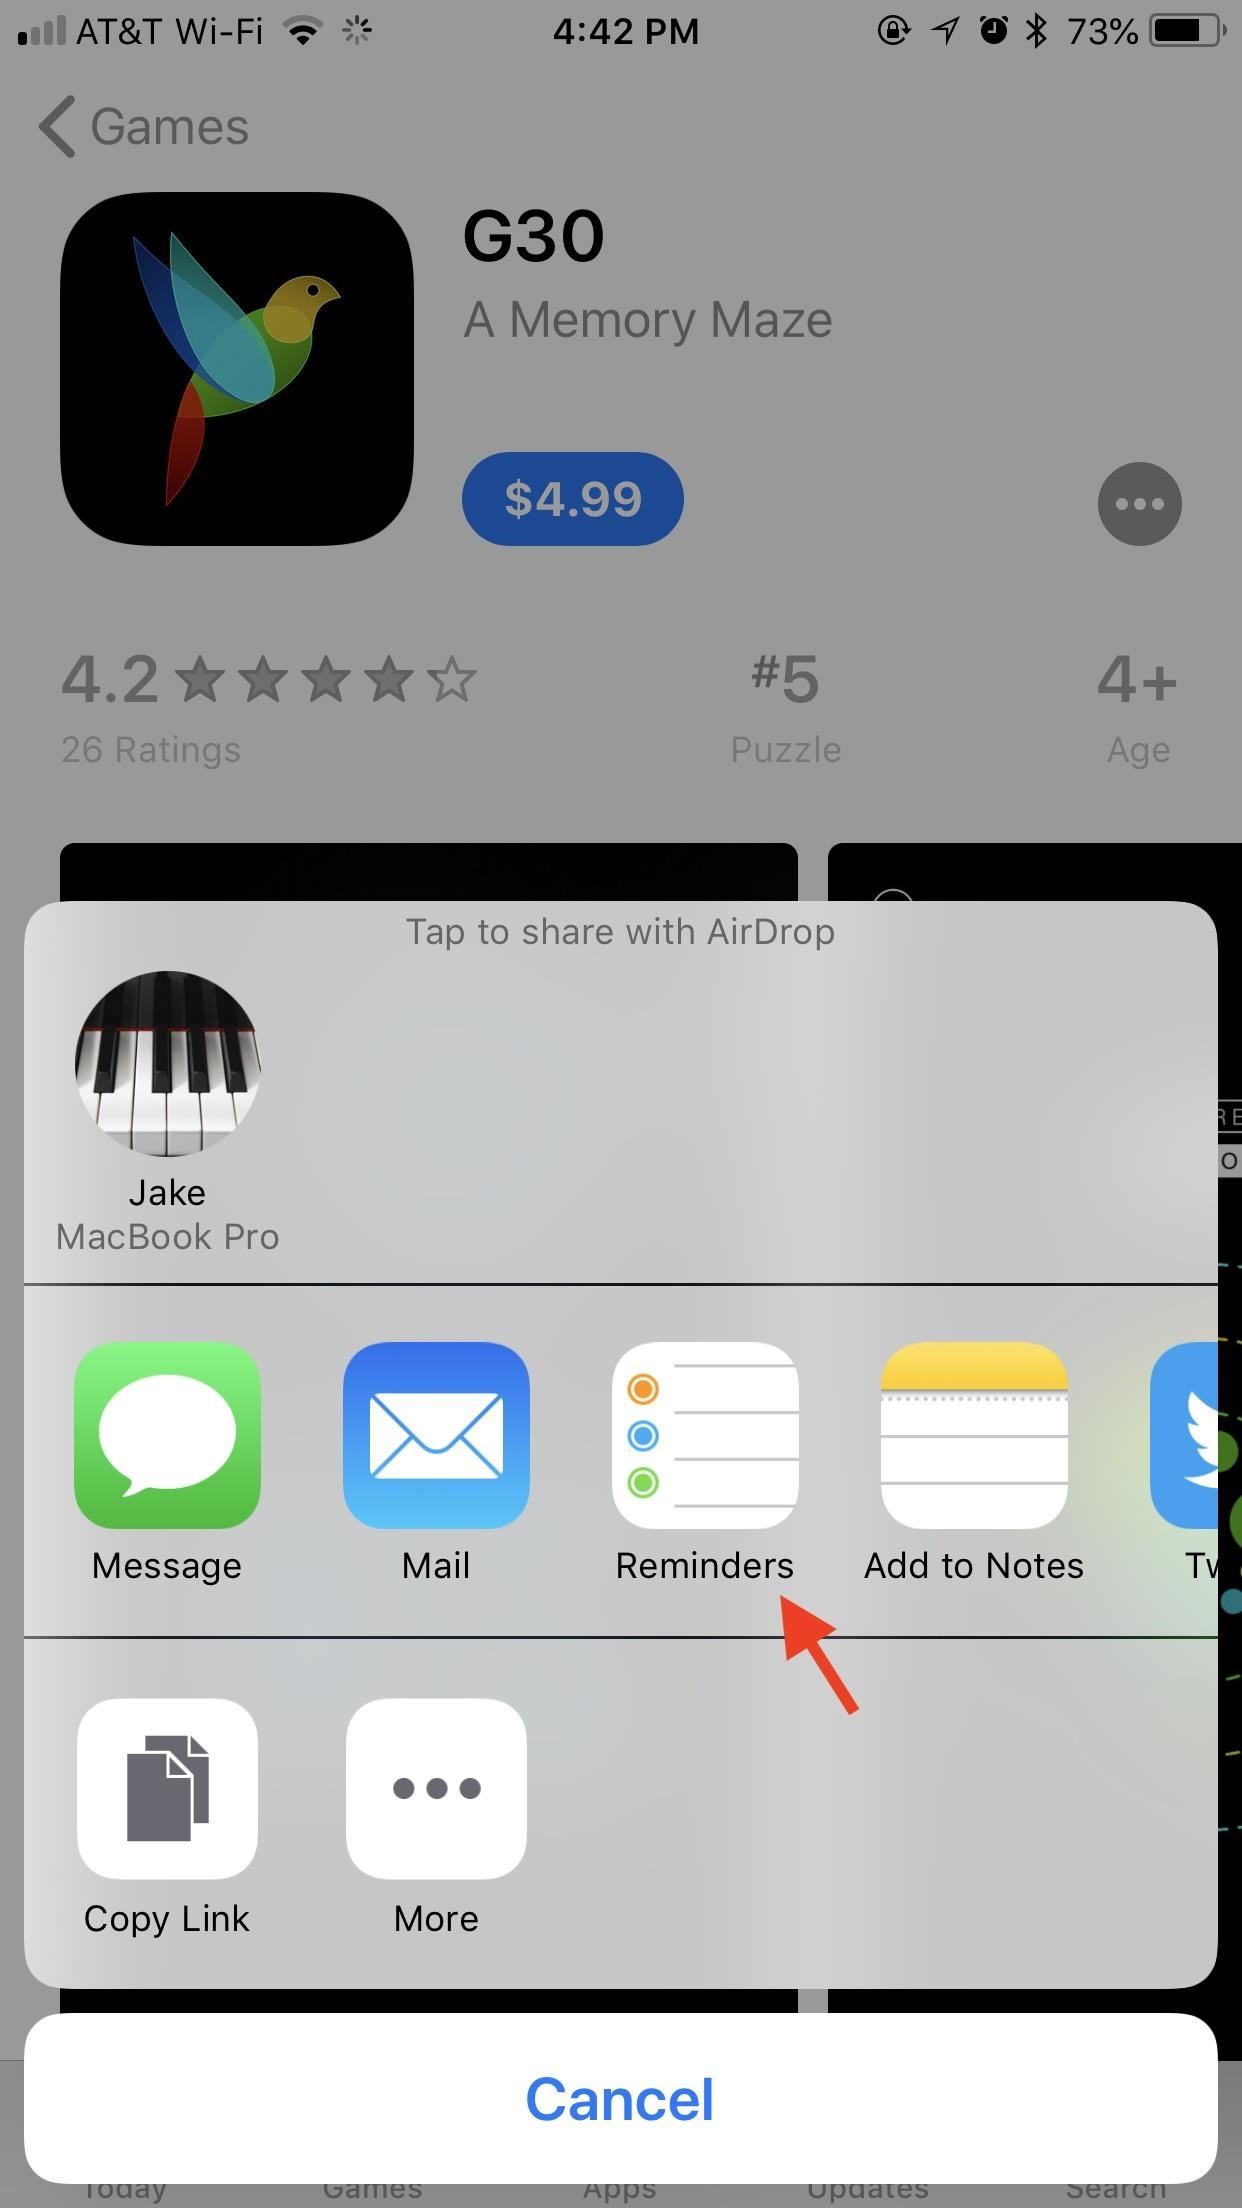 Missing the App Store's Wish List? This Is the Best Alternative for iOS 11